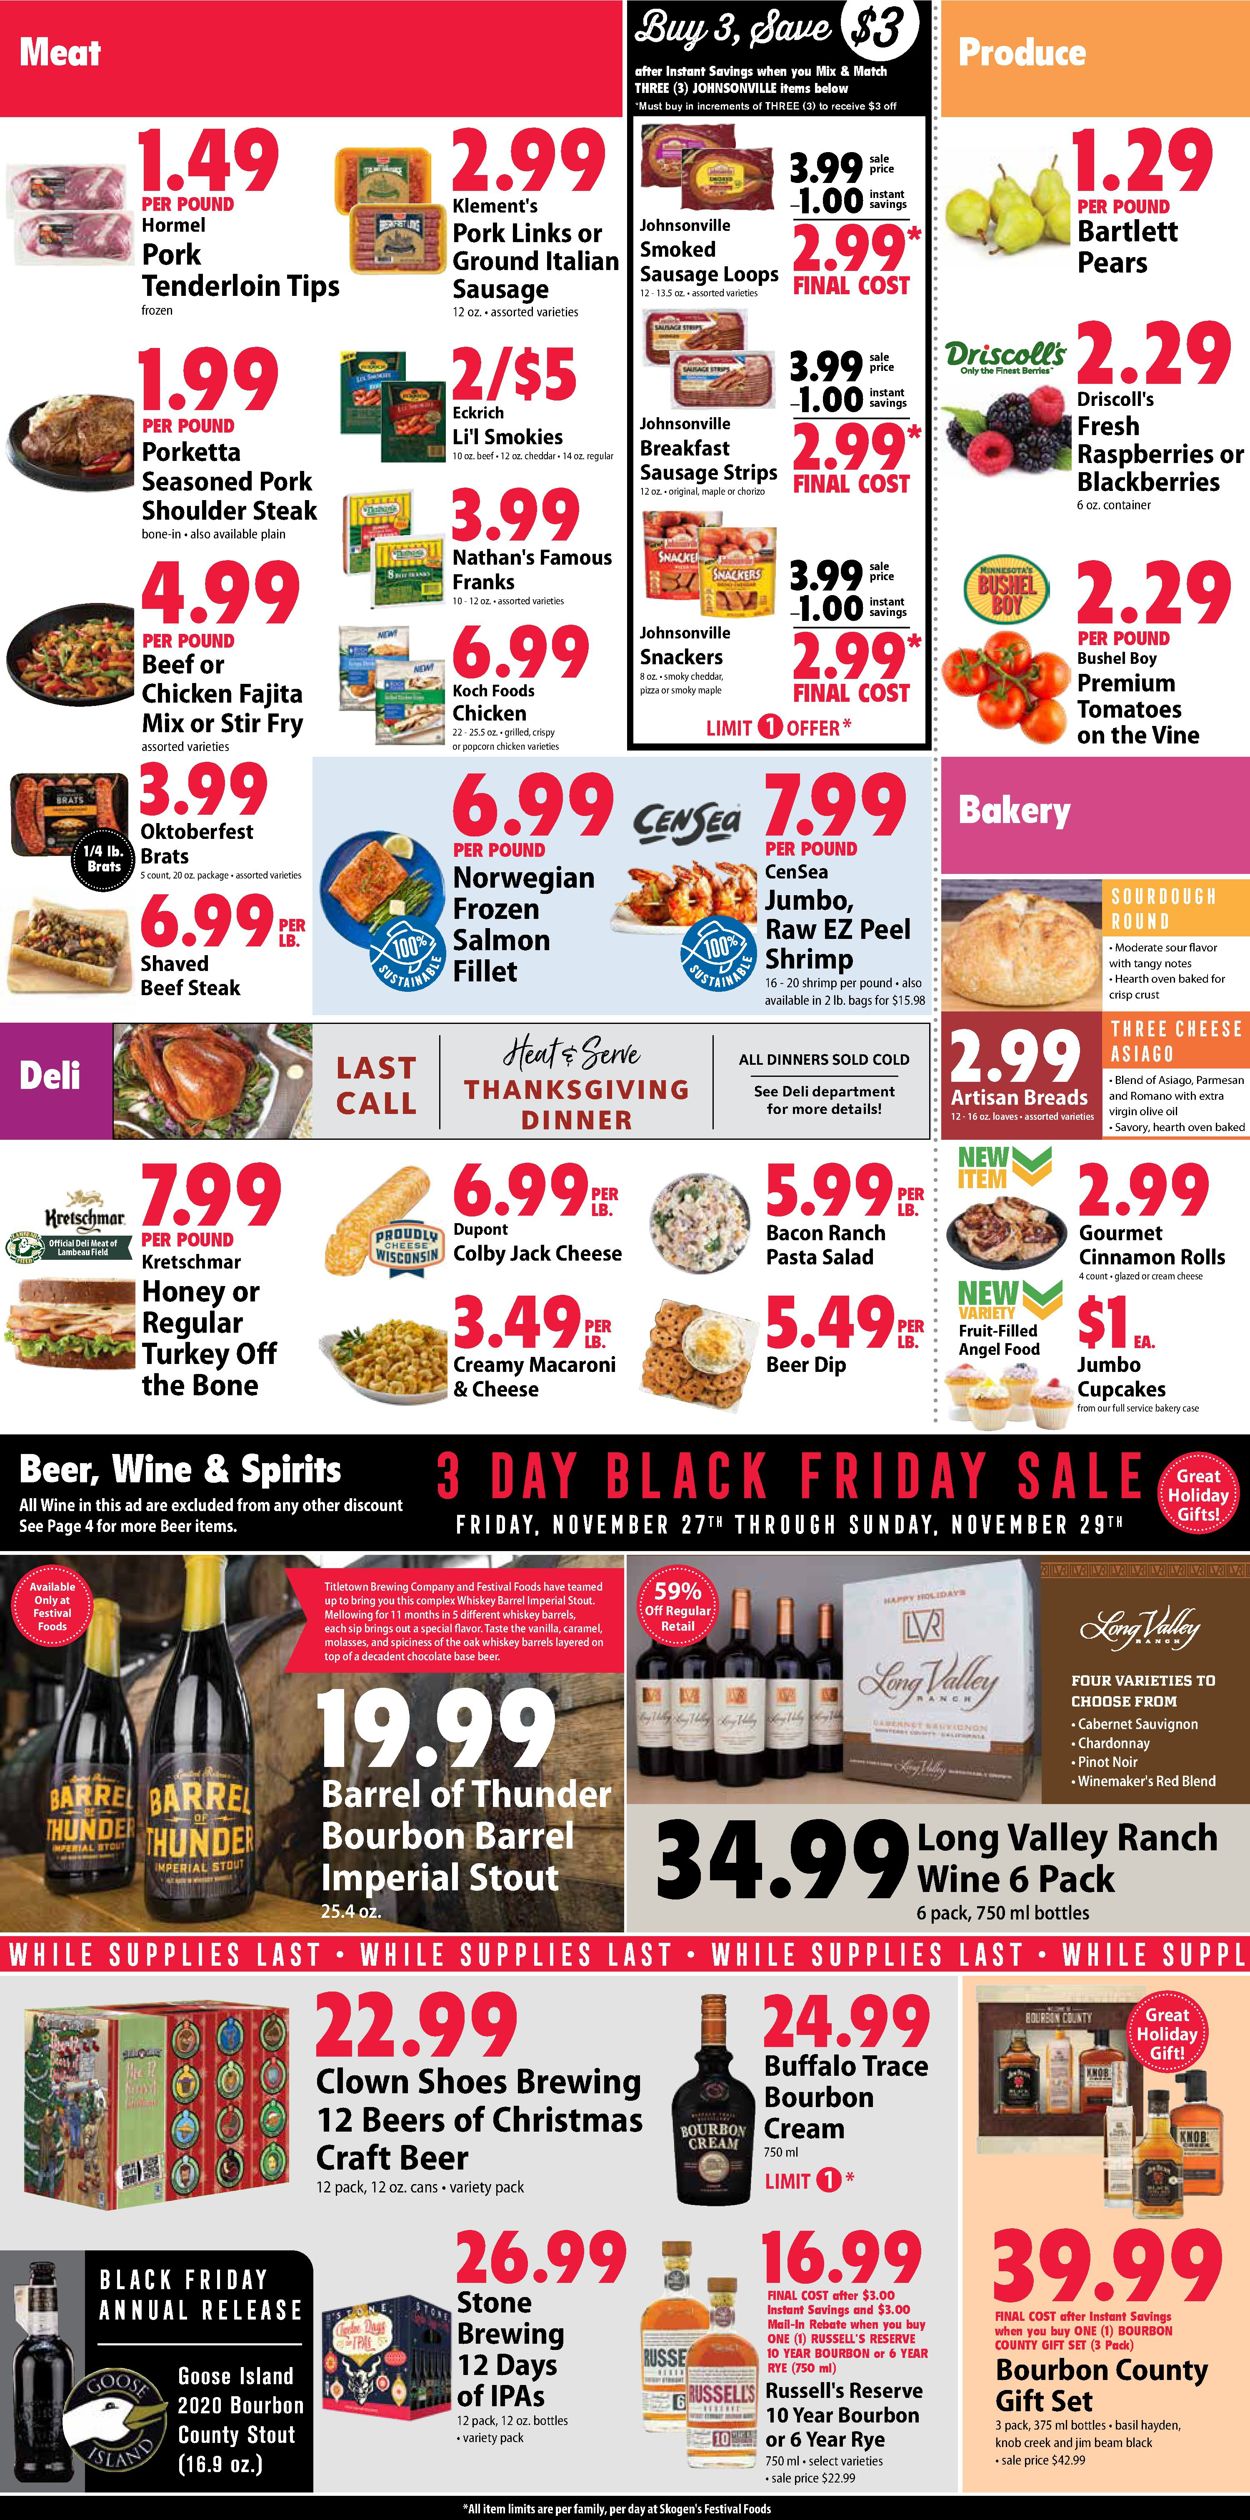 Festival Foods Black Friday 2020 Weekly Ad Circular - valid 11/25-12/01/2020 (Page 2)